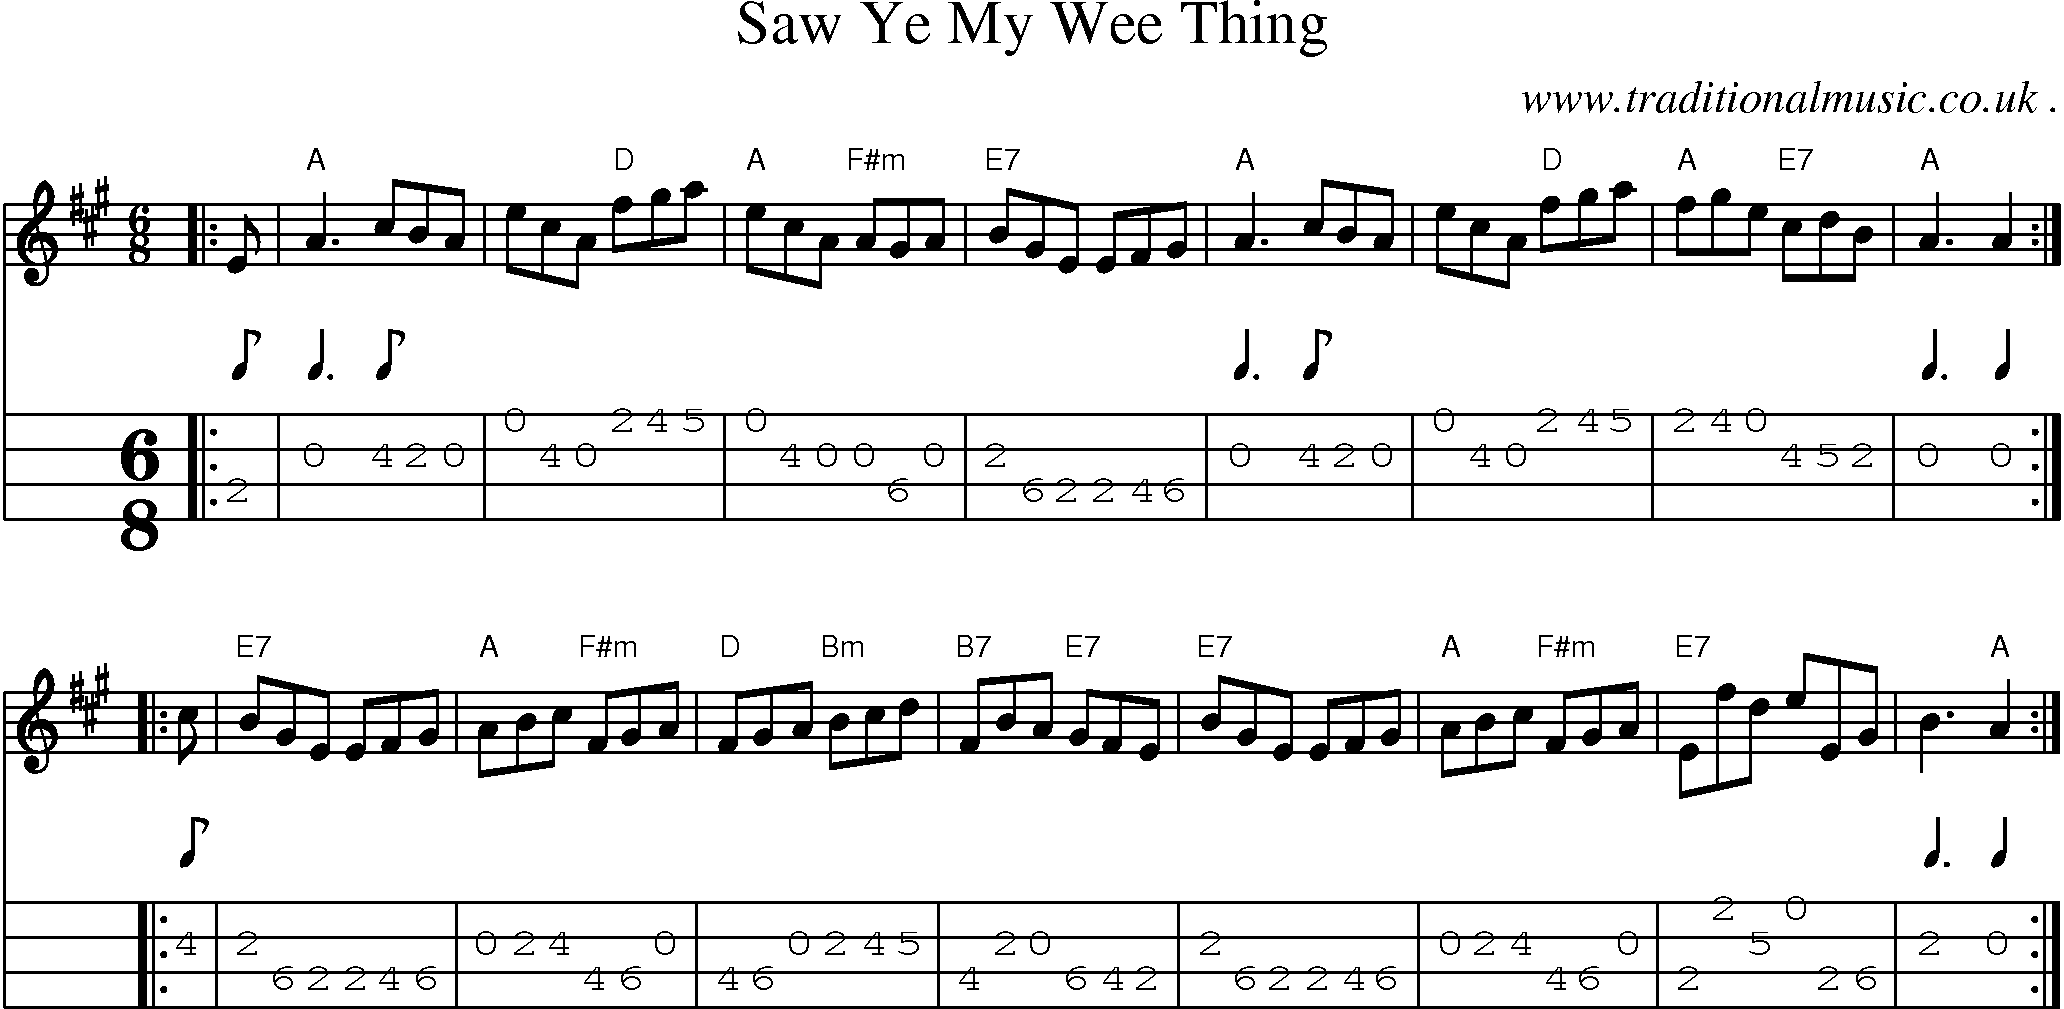 Sheet-music  score, Chords and Mandolin Tabs for Saw Ye My Wee Thing